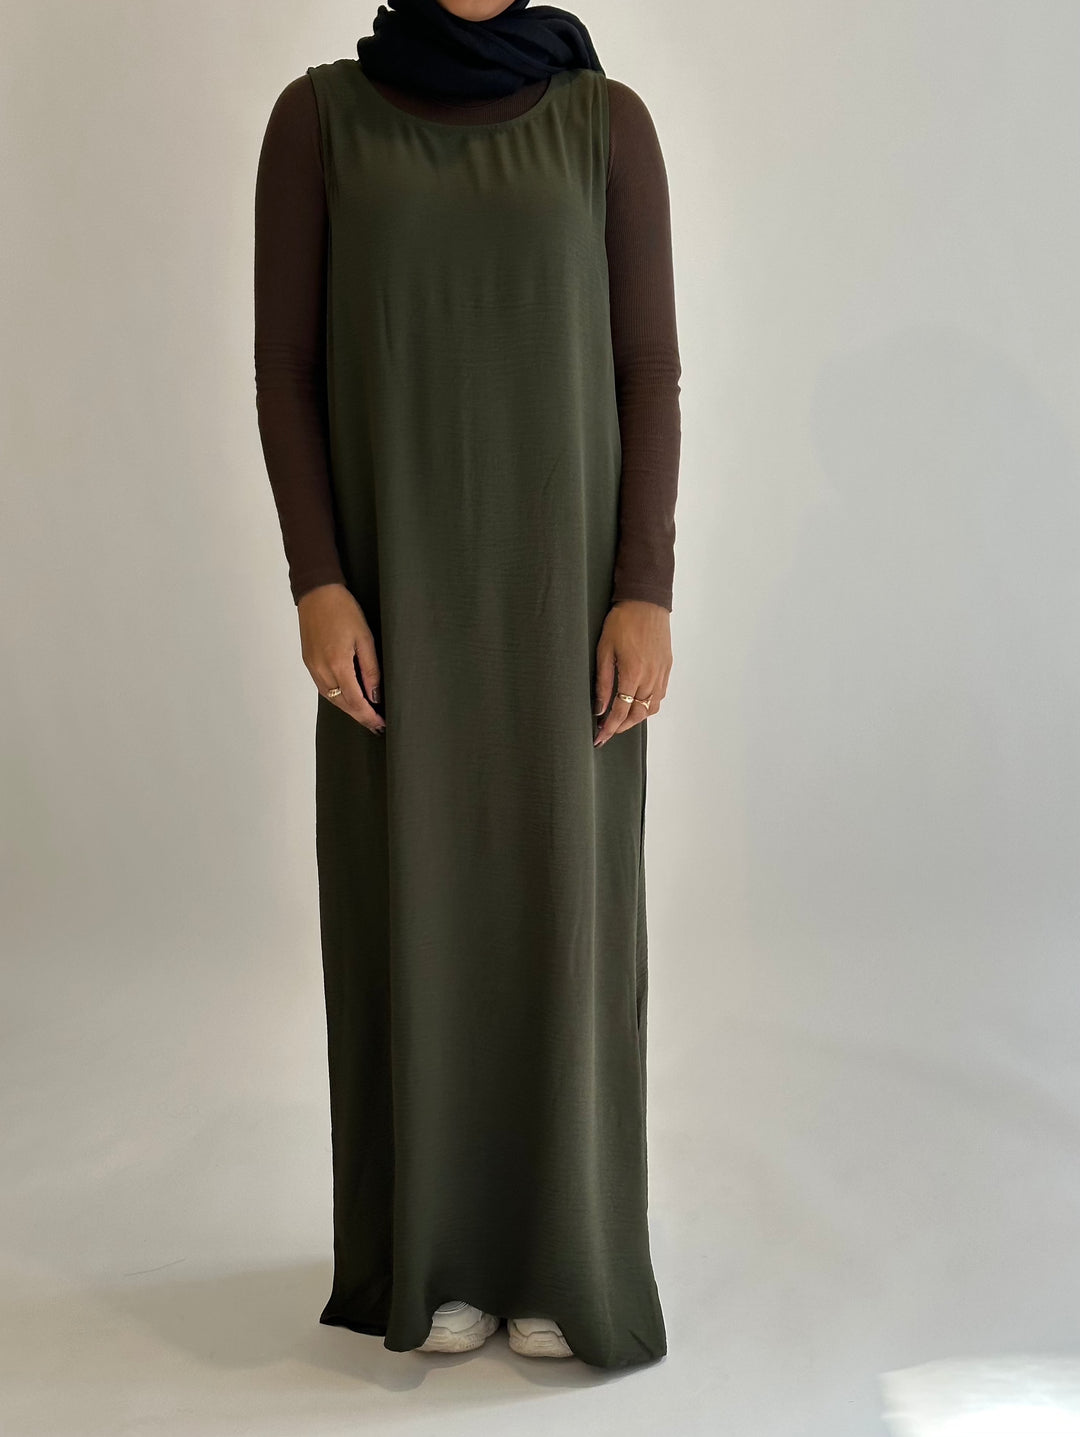 Get trendy with Mariya 2-piece Jilbab - Olive -  available at Voilee NY. Grab yours for $19.99 today!